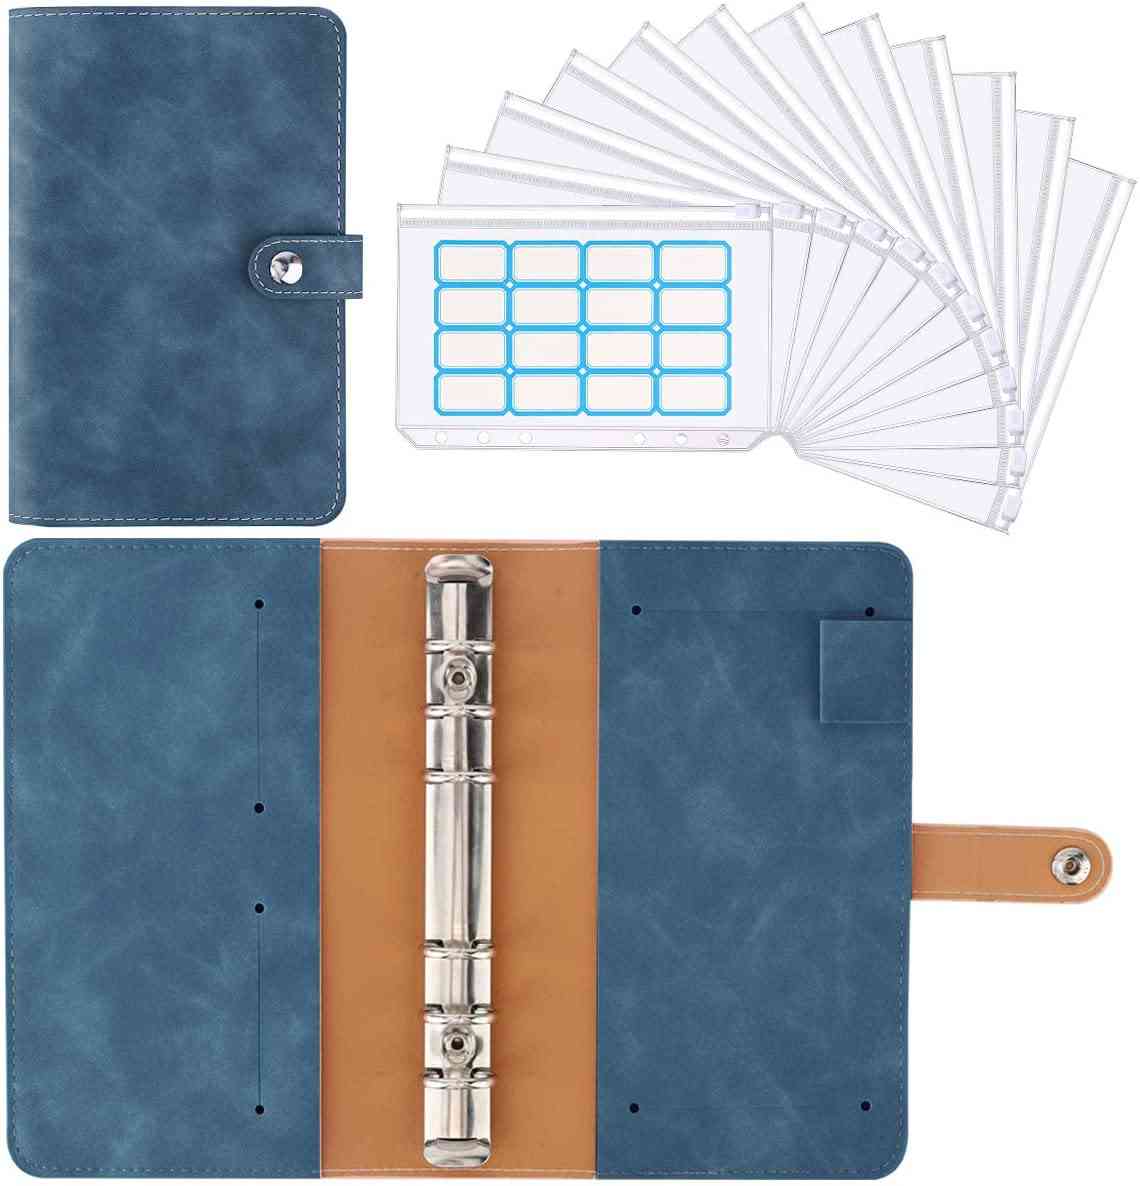 Pu Leather- Budget Planner, 6-round Rings Binder Cover & Plastic Envelopes